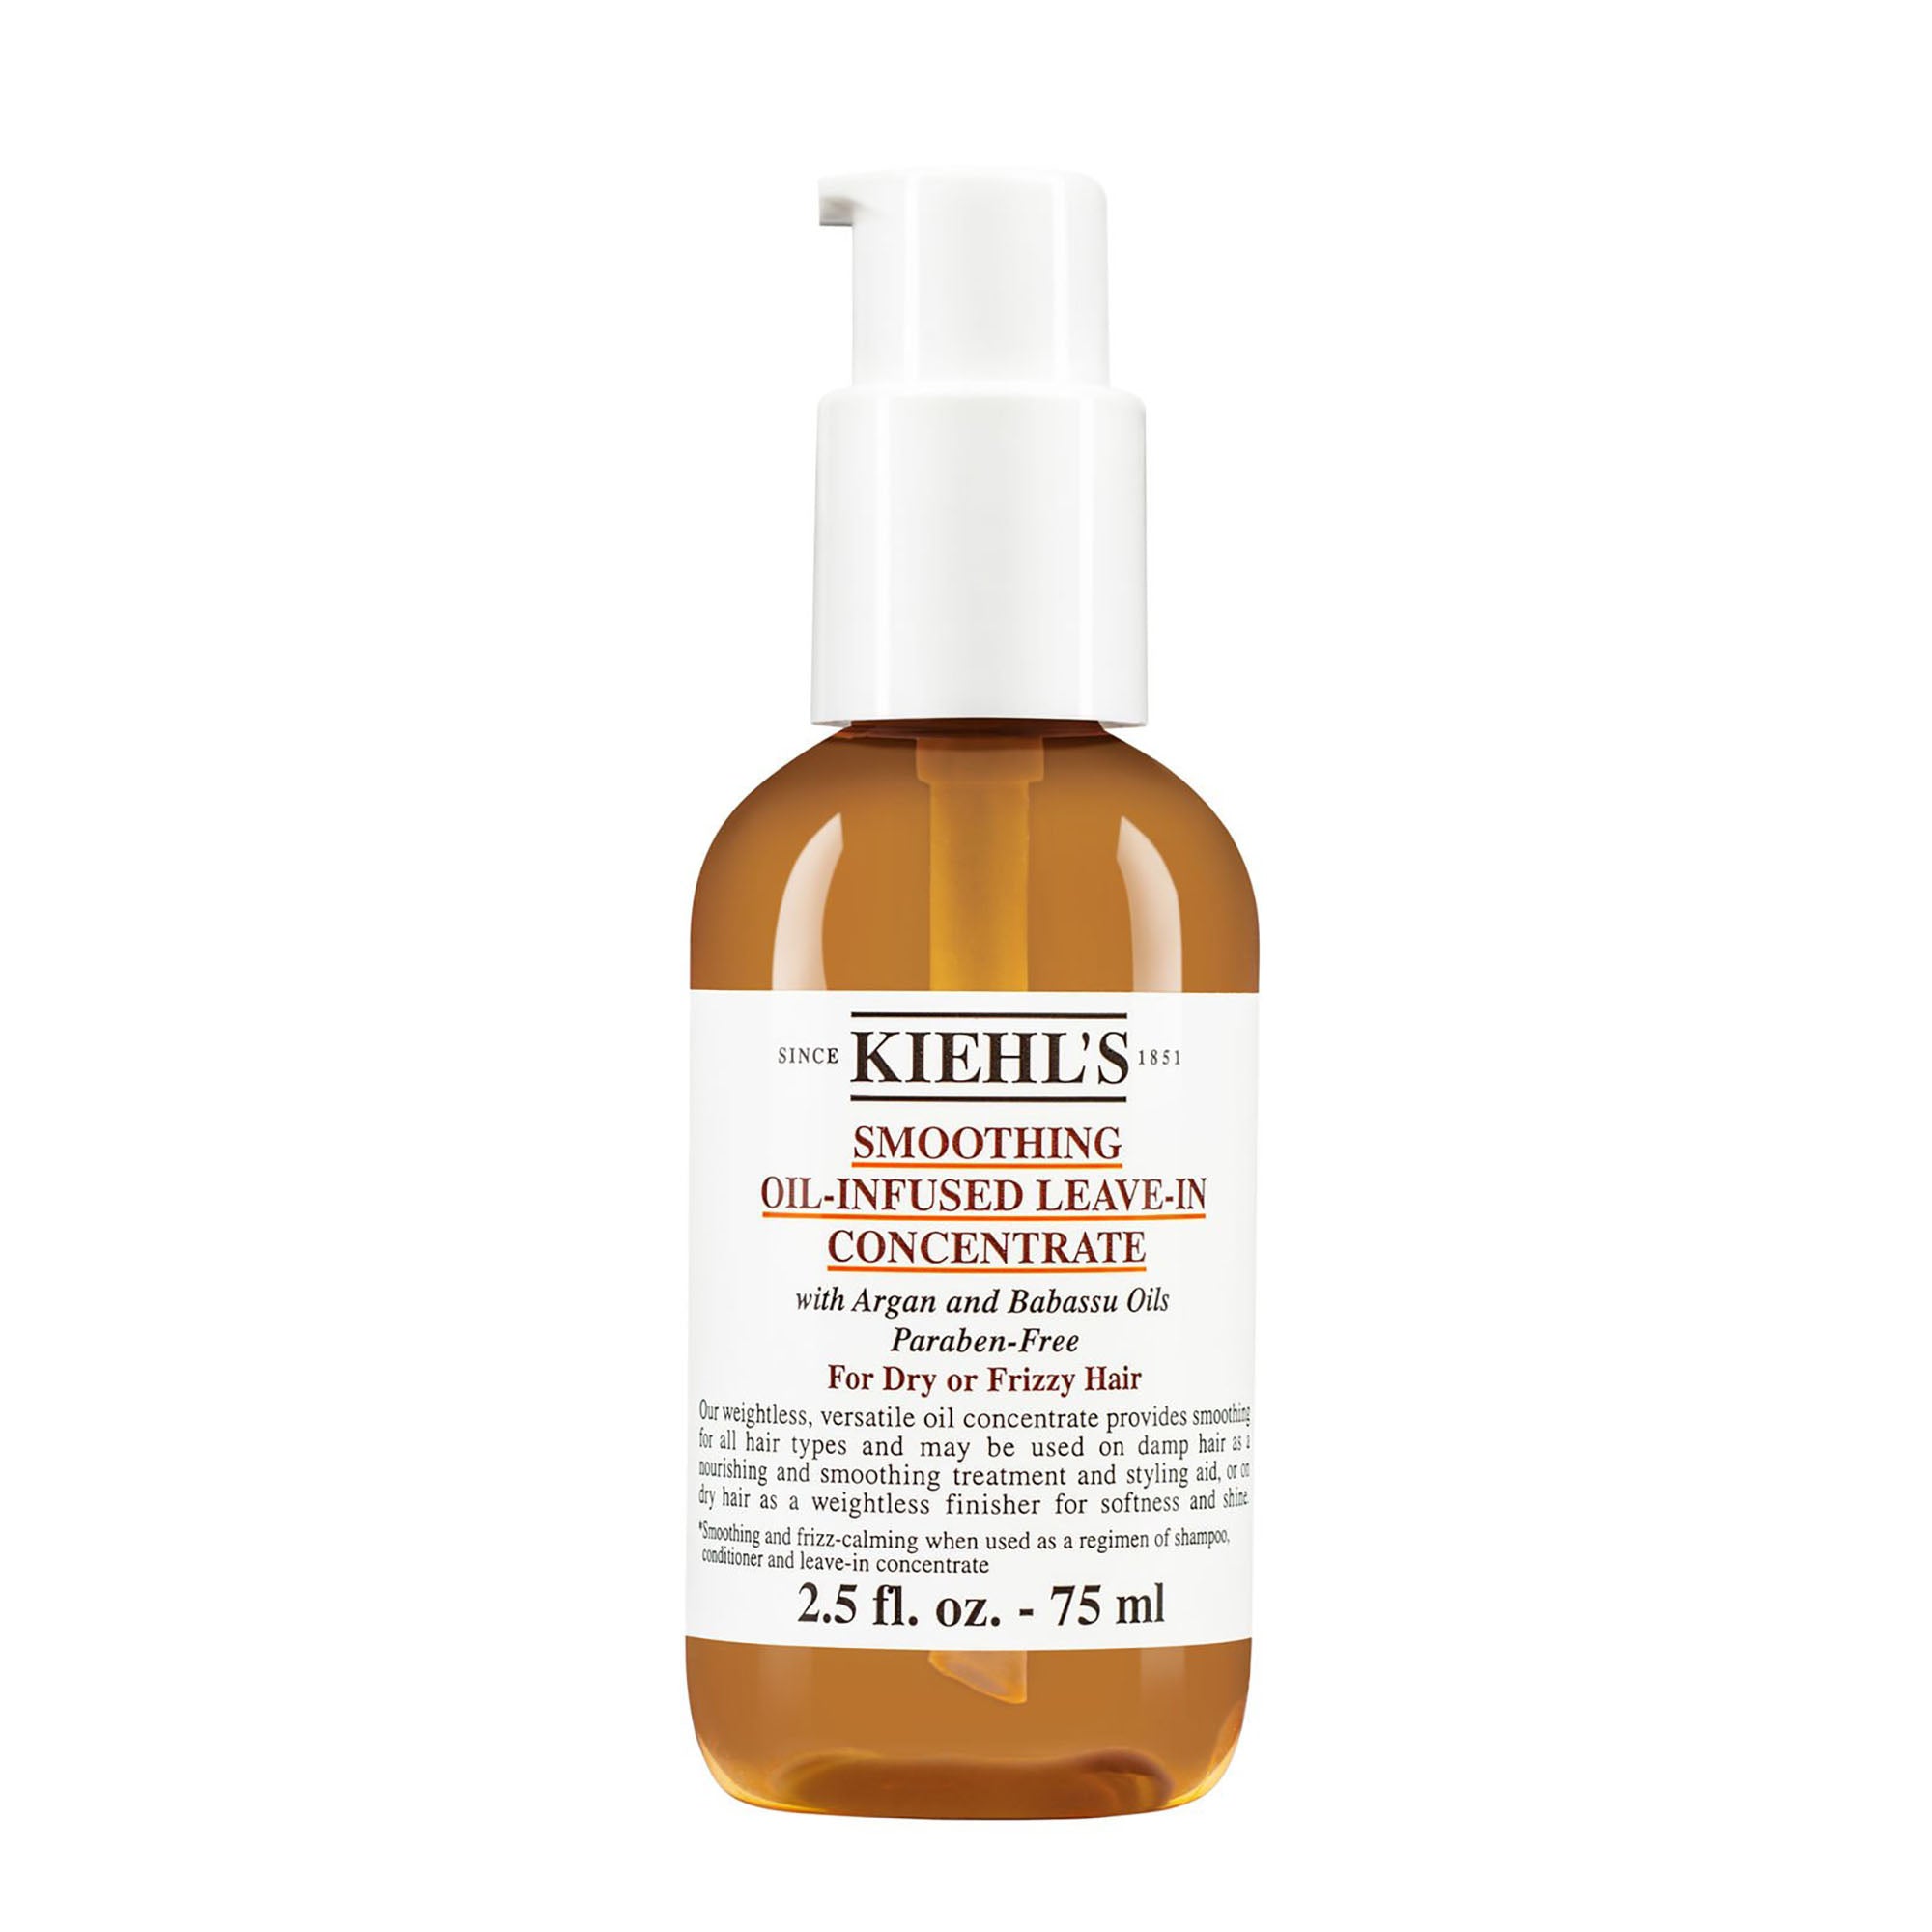 Kiehl's Smoothing Oil-Infused Leave-in Concentrate / 6.7OZ